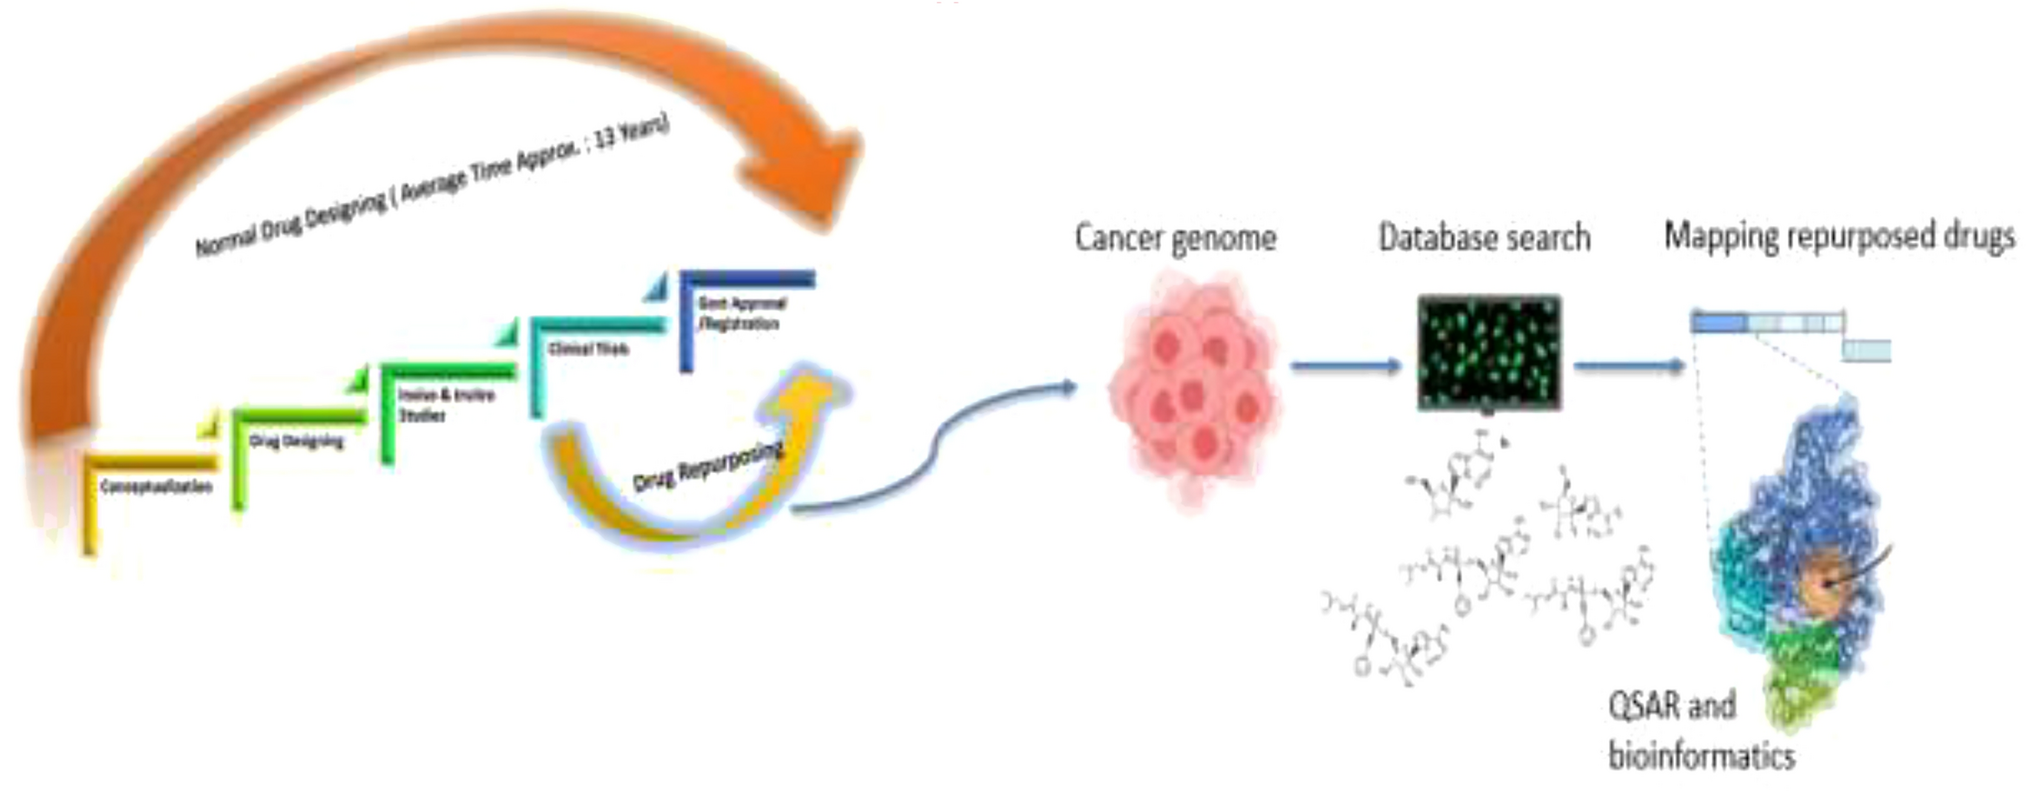 Comprehensive review of the repositioning of non-oncologic drugs for cancer immunotherapy